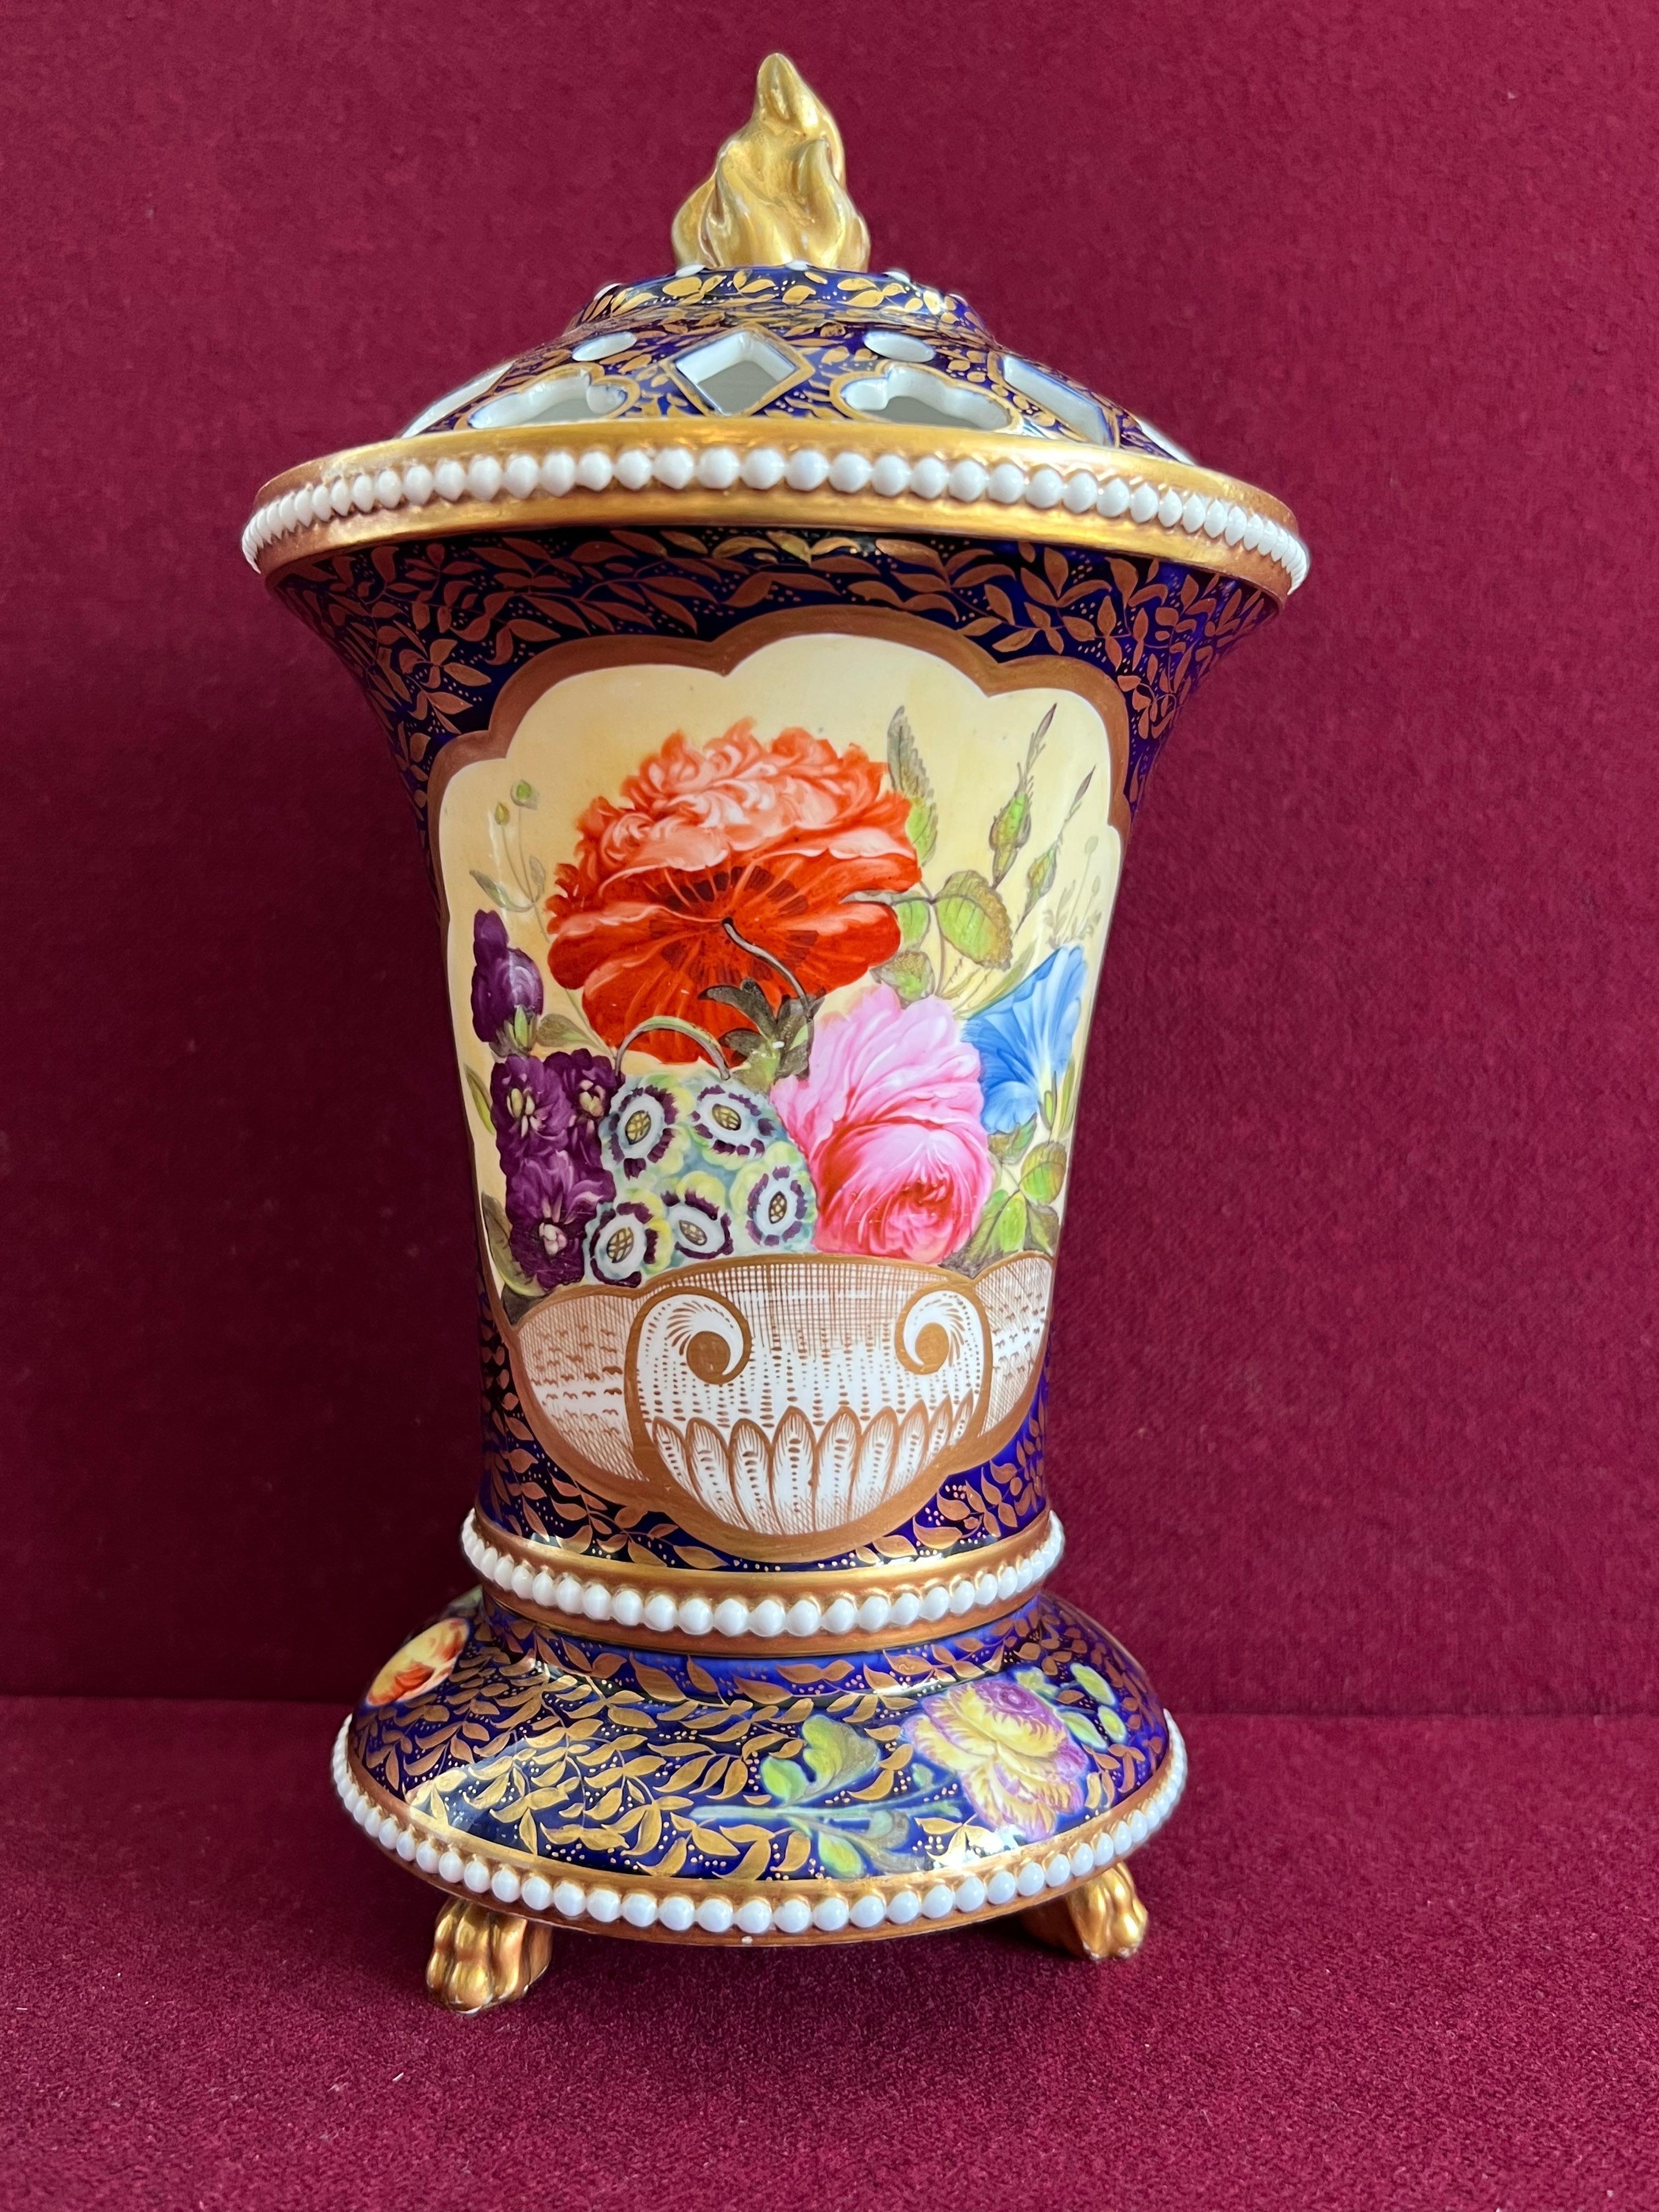 A fine Spode Porcelain beaded Pot Pourri vase c.1820-1825. Of flared trumpet shape, embossed with three bands of pearls, resting upon three gilded paw feet, the pierces cover with flamiform finial. Richly decorated in pattern 2575, with a finely